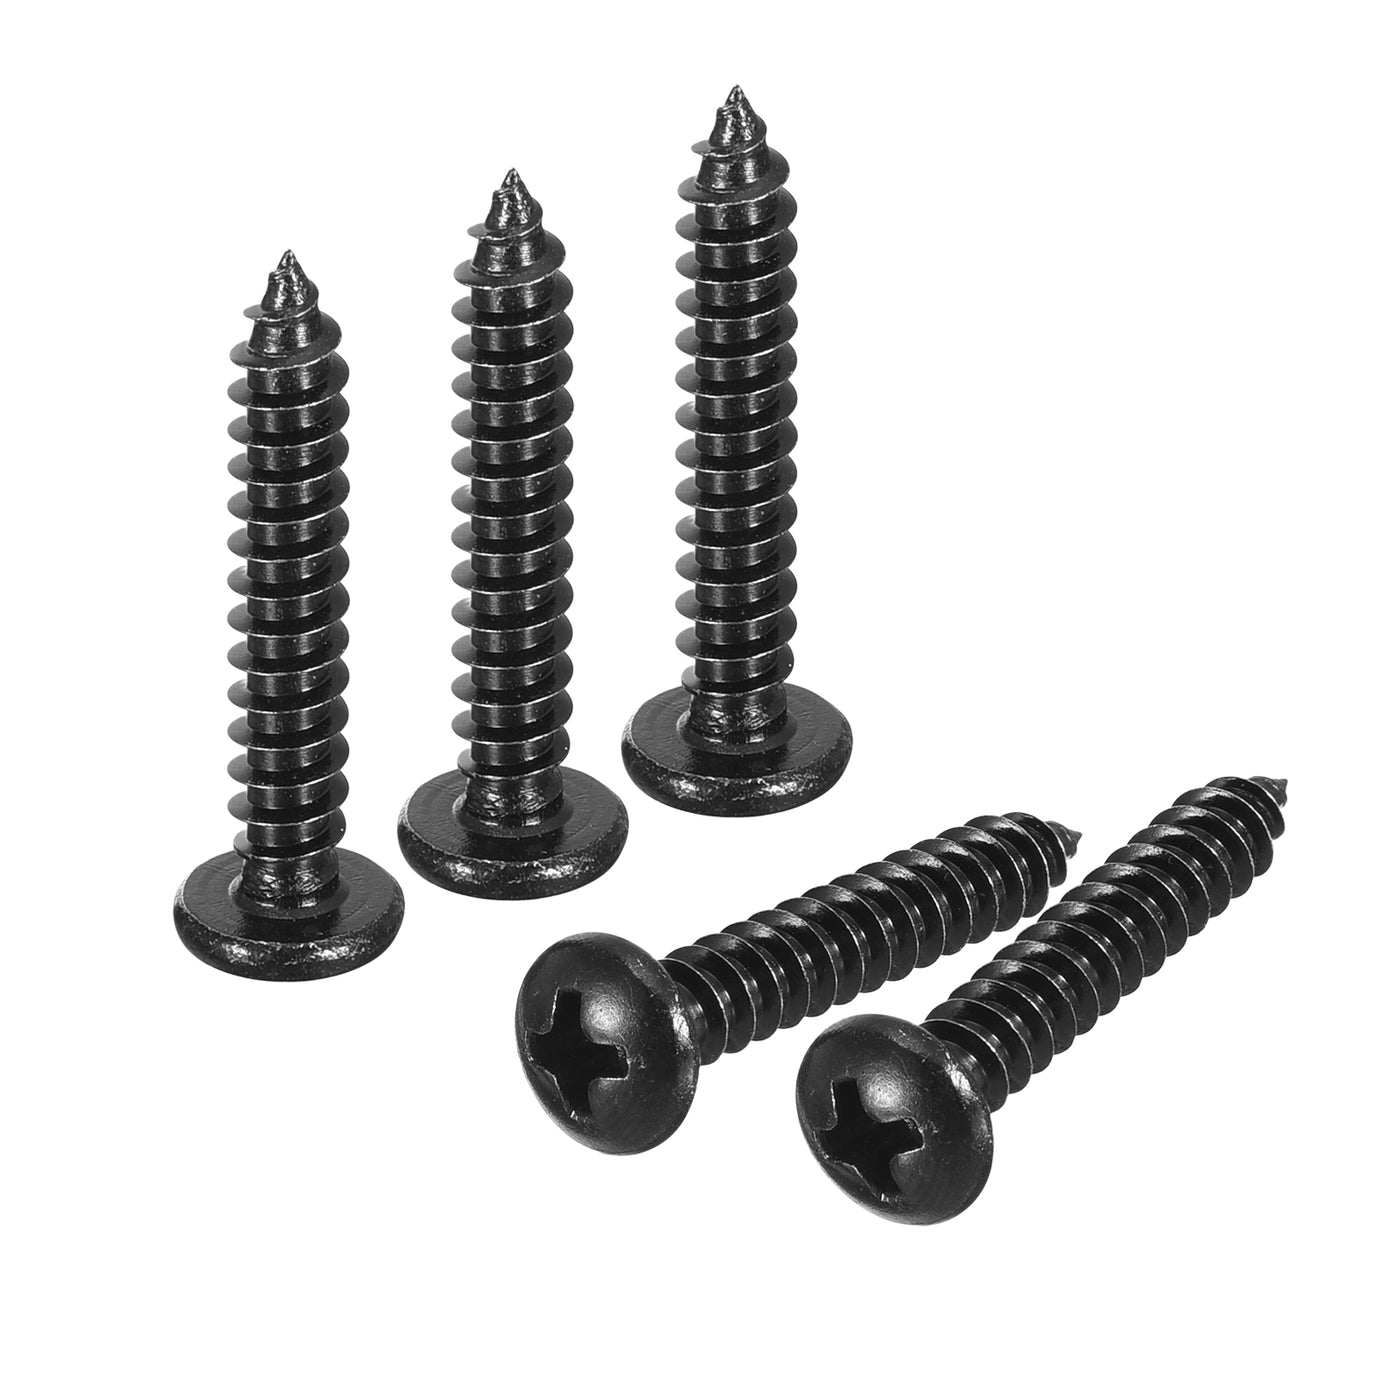 uxcell Uxcell 4mm x 25mm Phillips Pan Head Self-tapping Screw, 100pcs - 304 Stainless Steel Round Head Wood Screw Full Thread (Black)